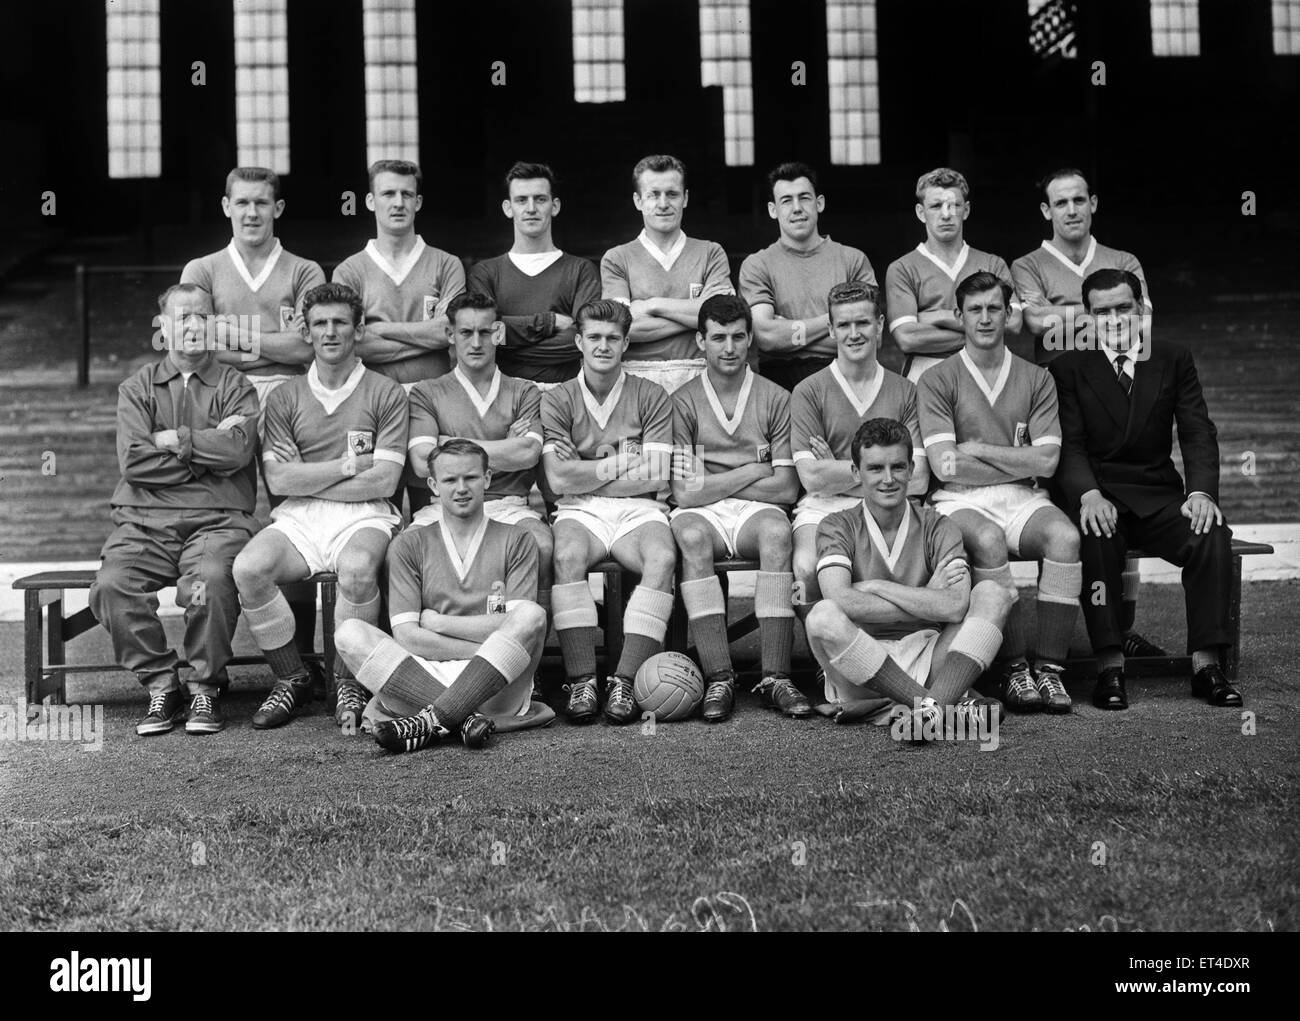 Leicester City  team group photograph who will contest the 1961 FA Cup Final.  Back row: (left to right): Tony Knapp, Ian King, George Heyes, Ken Keyworth, Gordon Banks, Len Chalmers, Derek Hines Front: Dowdells (trainer), Colin Appleton, Howard Riley, Albert Cheesebrough, Ken Leek, Jimmy Walsh, Gordon Wills, Matt Gillies (manager); Seated: Ian White, Richie Norman. May 1961. Stock Photo